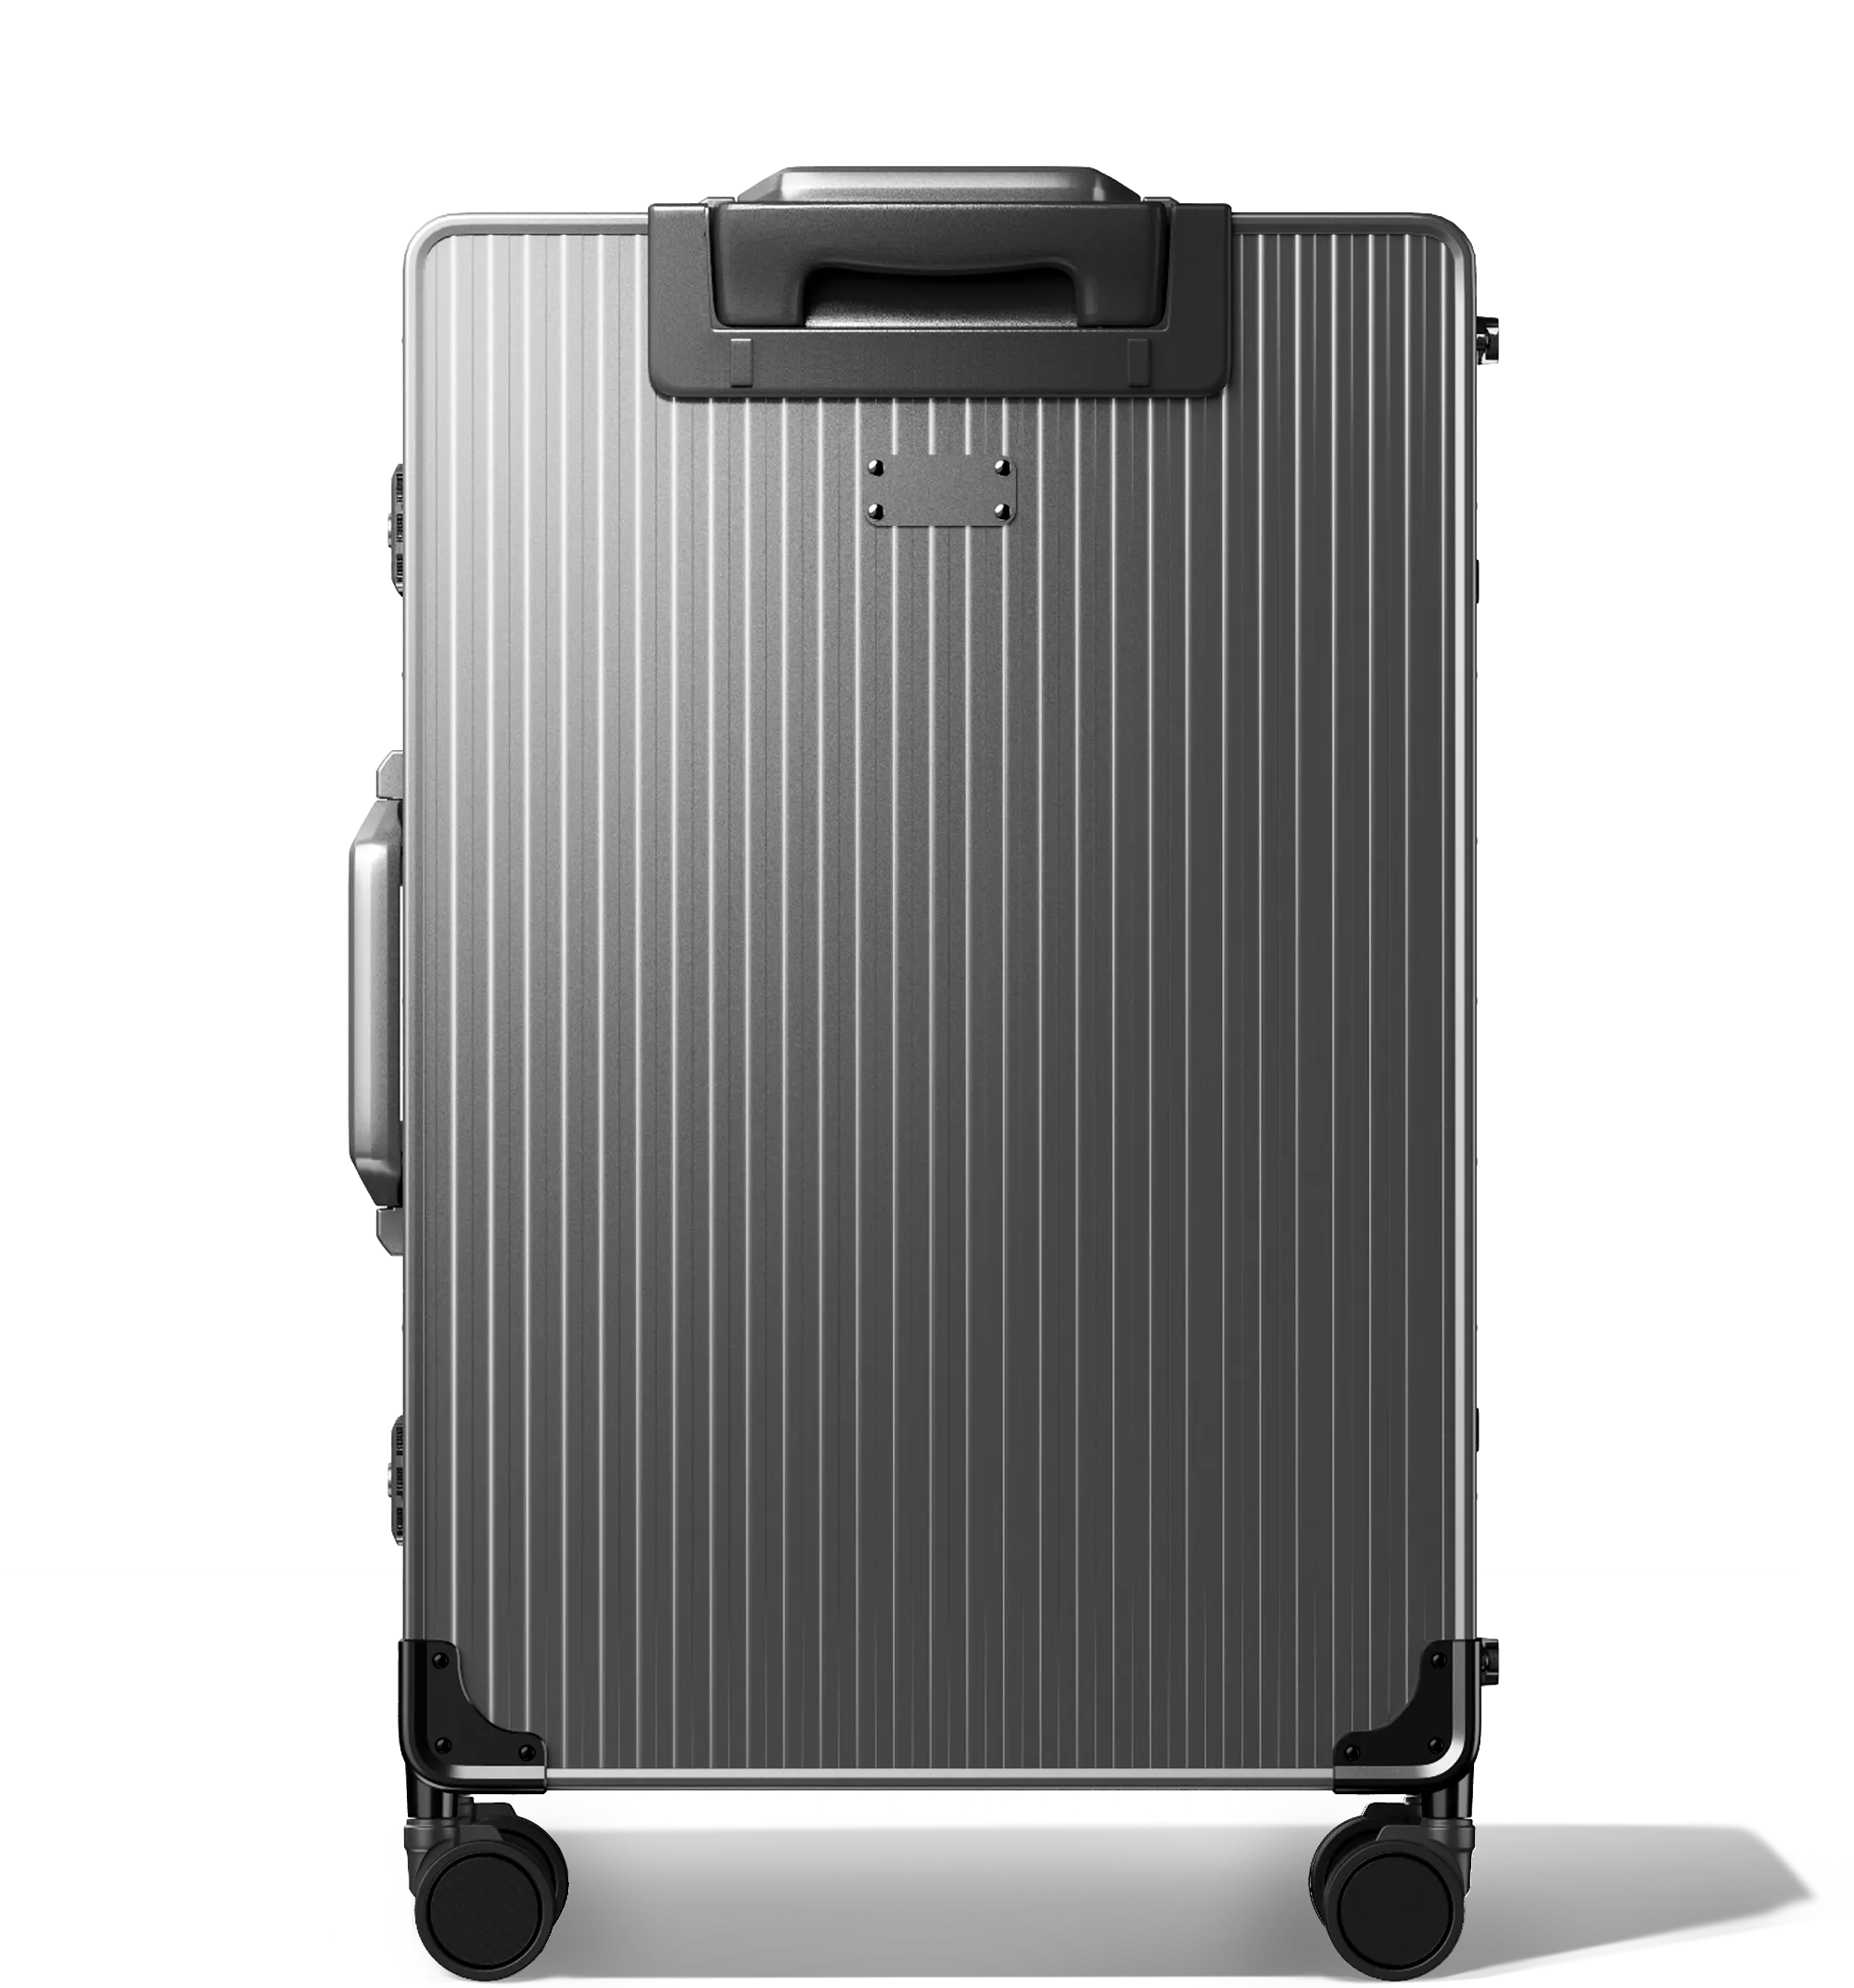 Frontal view of a Gun Metal Check-In 65/25 , vertical hard-shell aluminium Luggage with ribbed texture, featuring a top handle, side latches, and four multi-directional spinner wheels, against a white background.